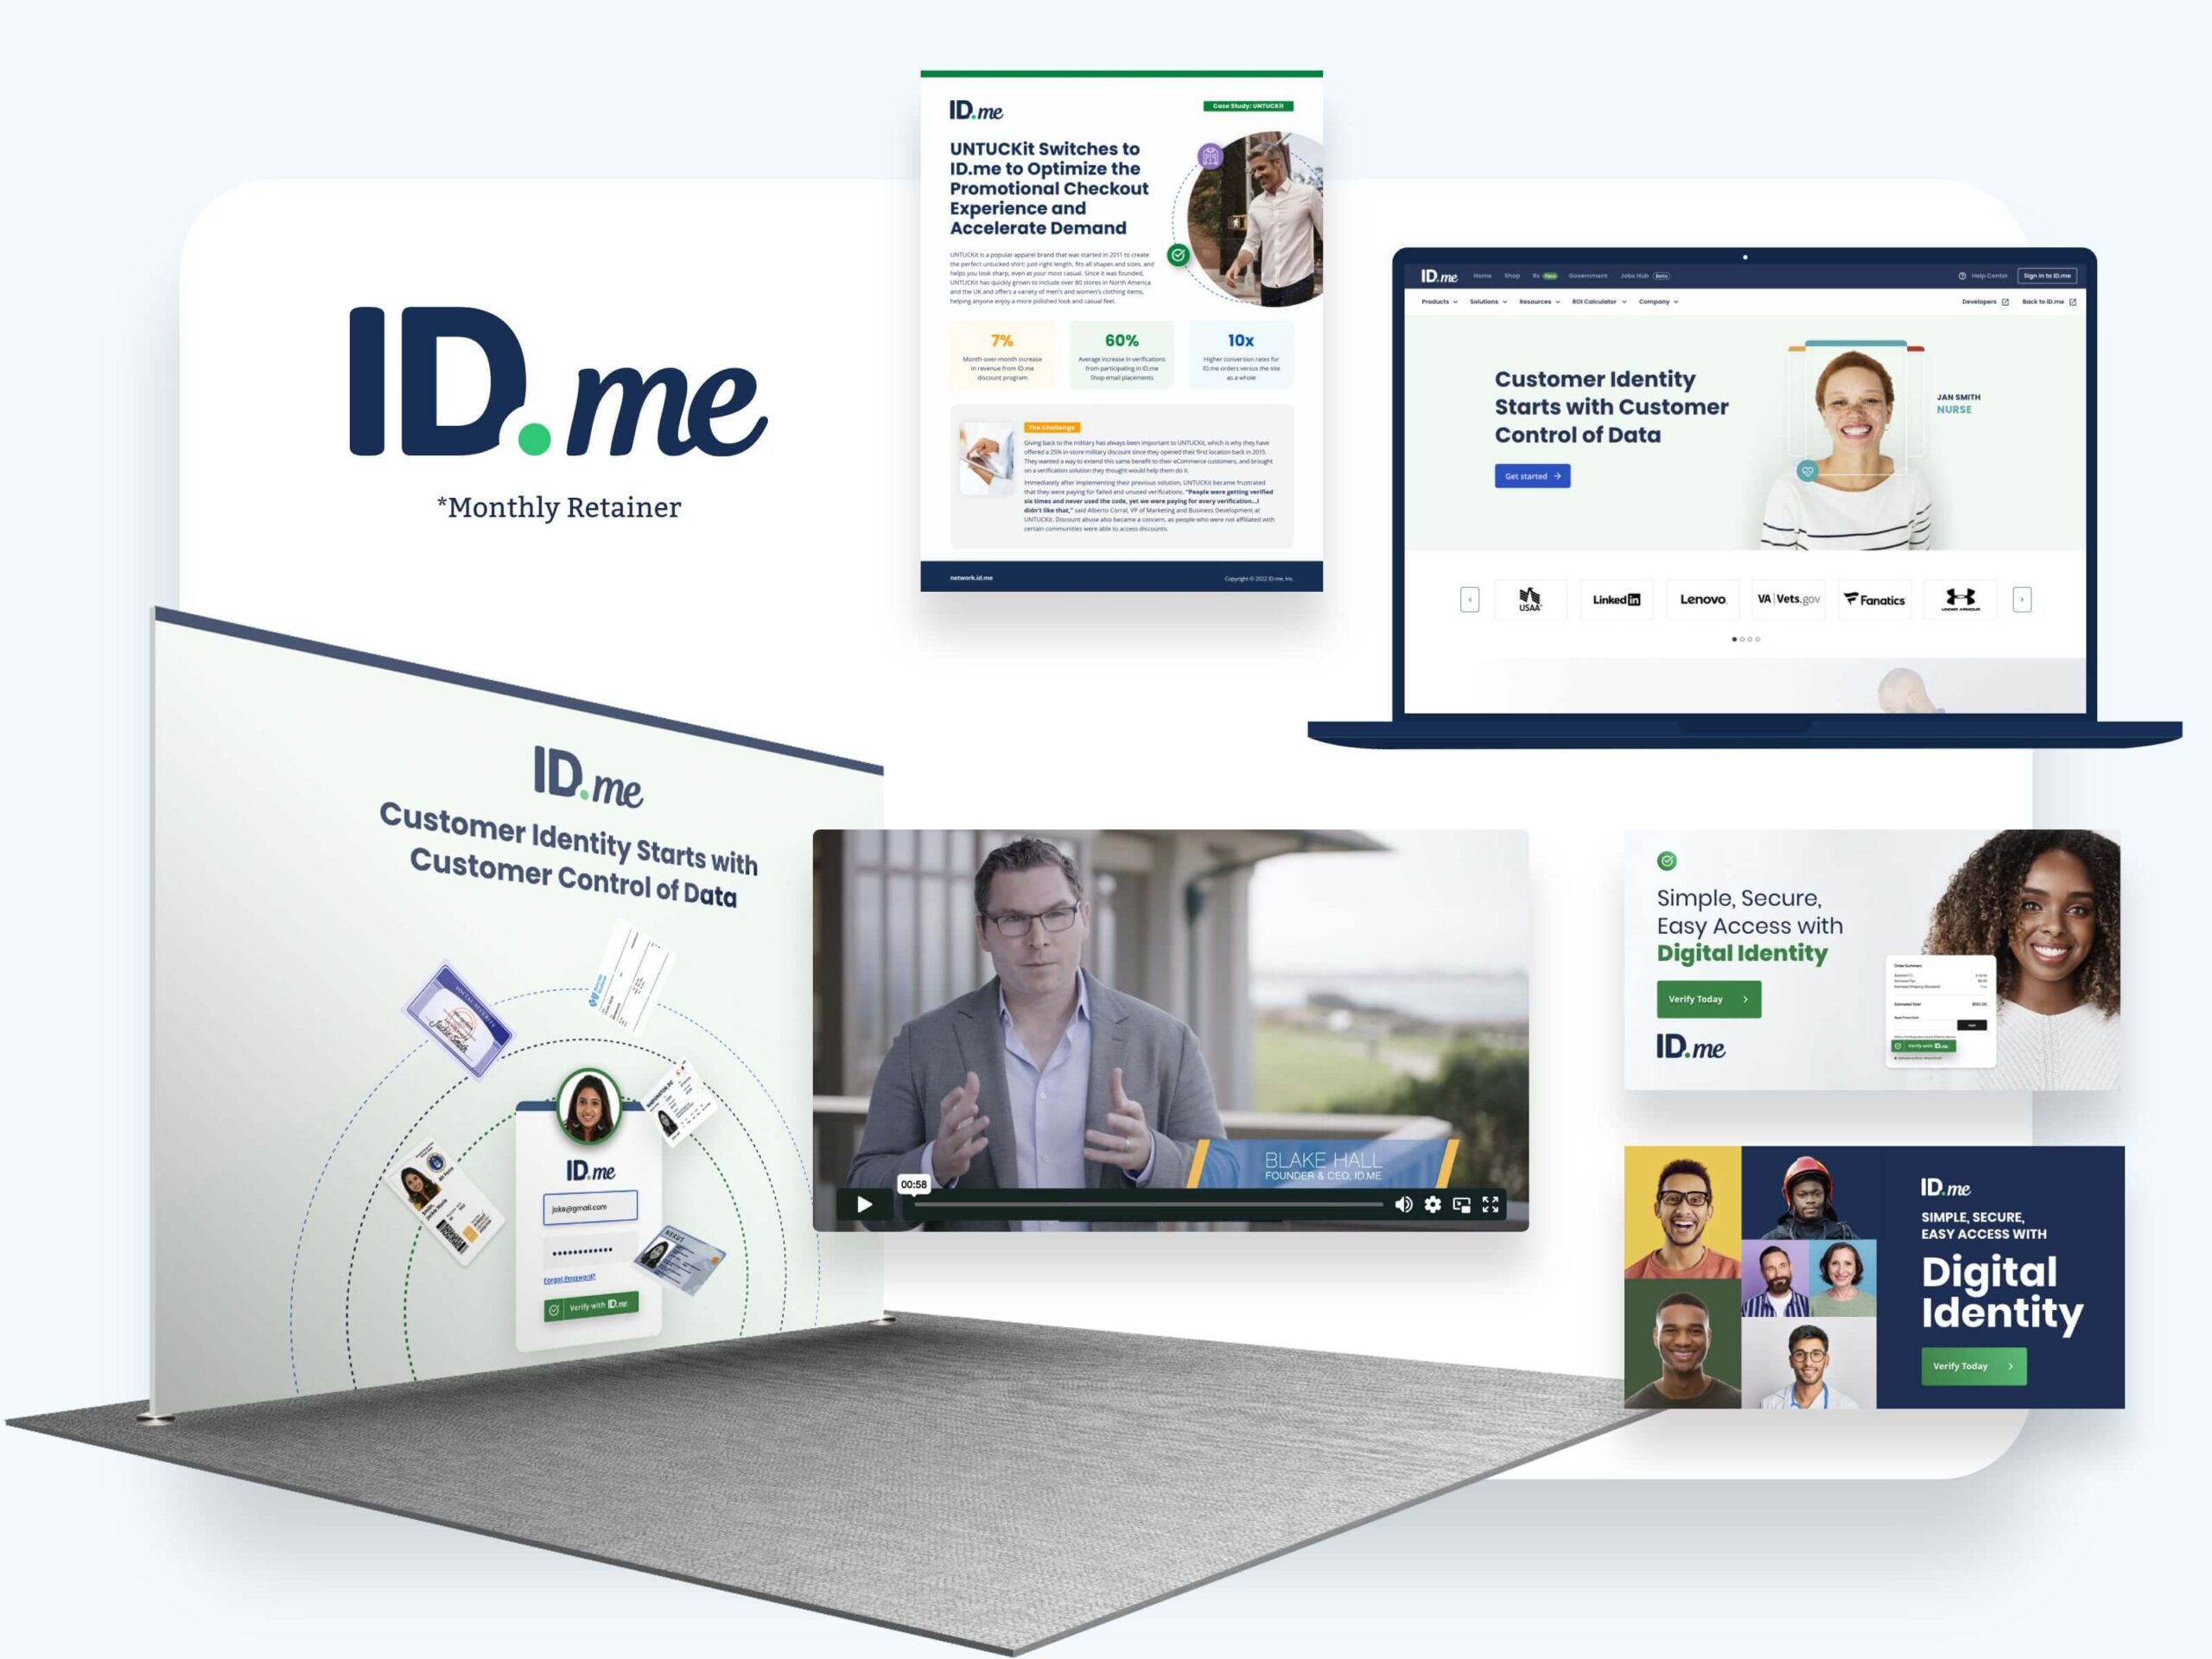 Punch-as-a-service – Client IDme